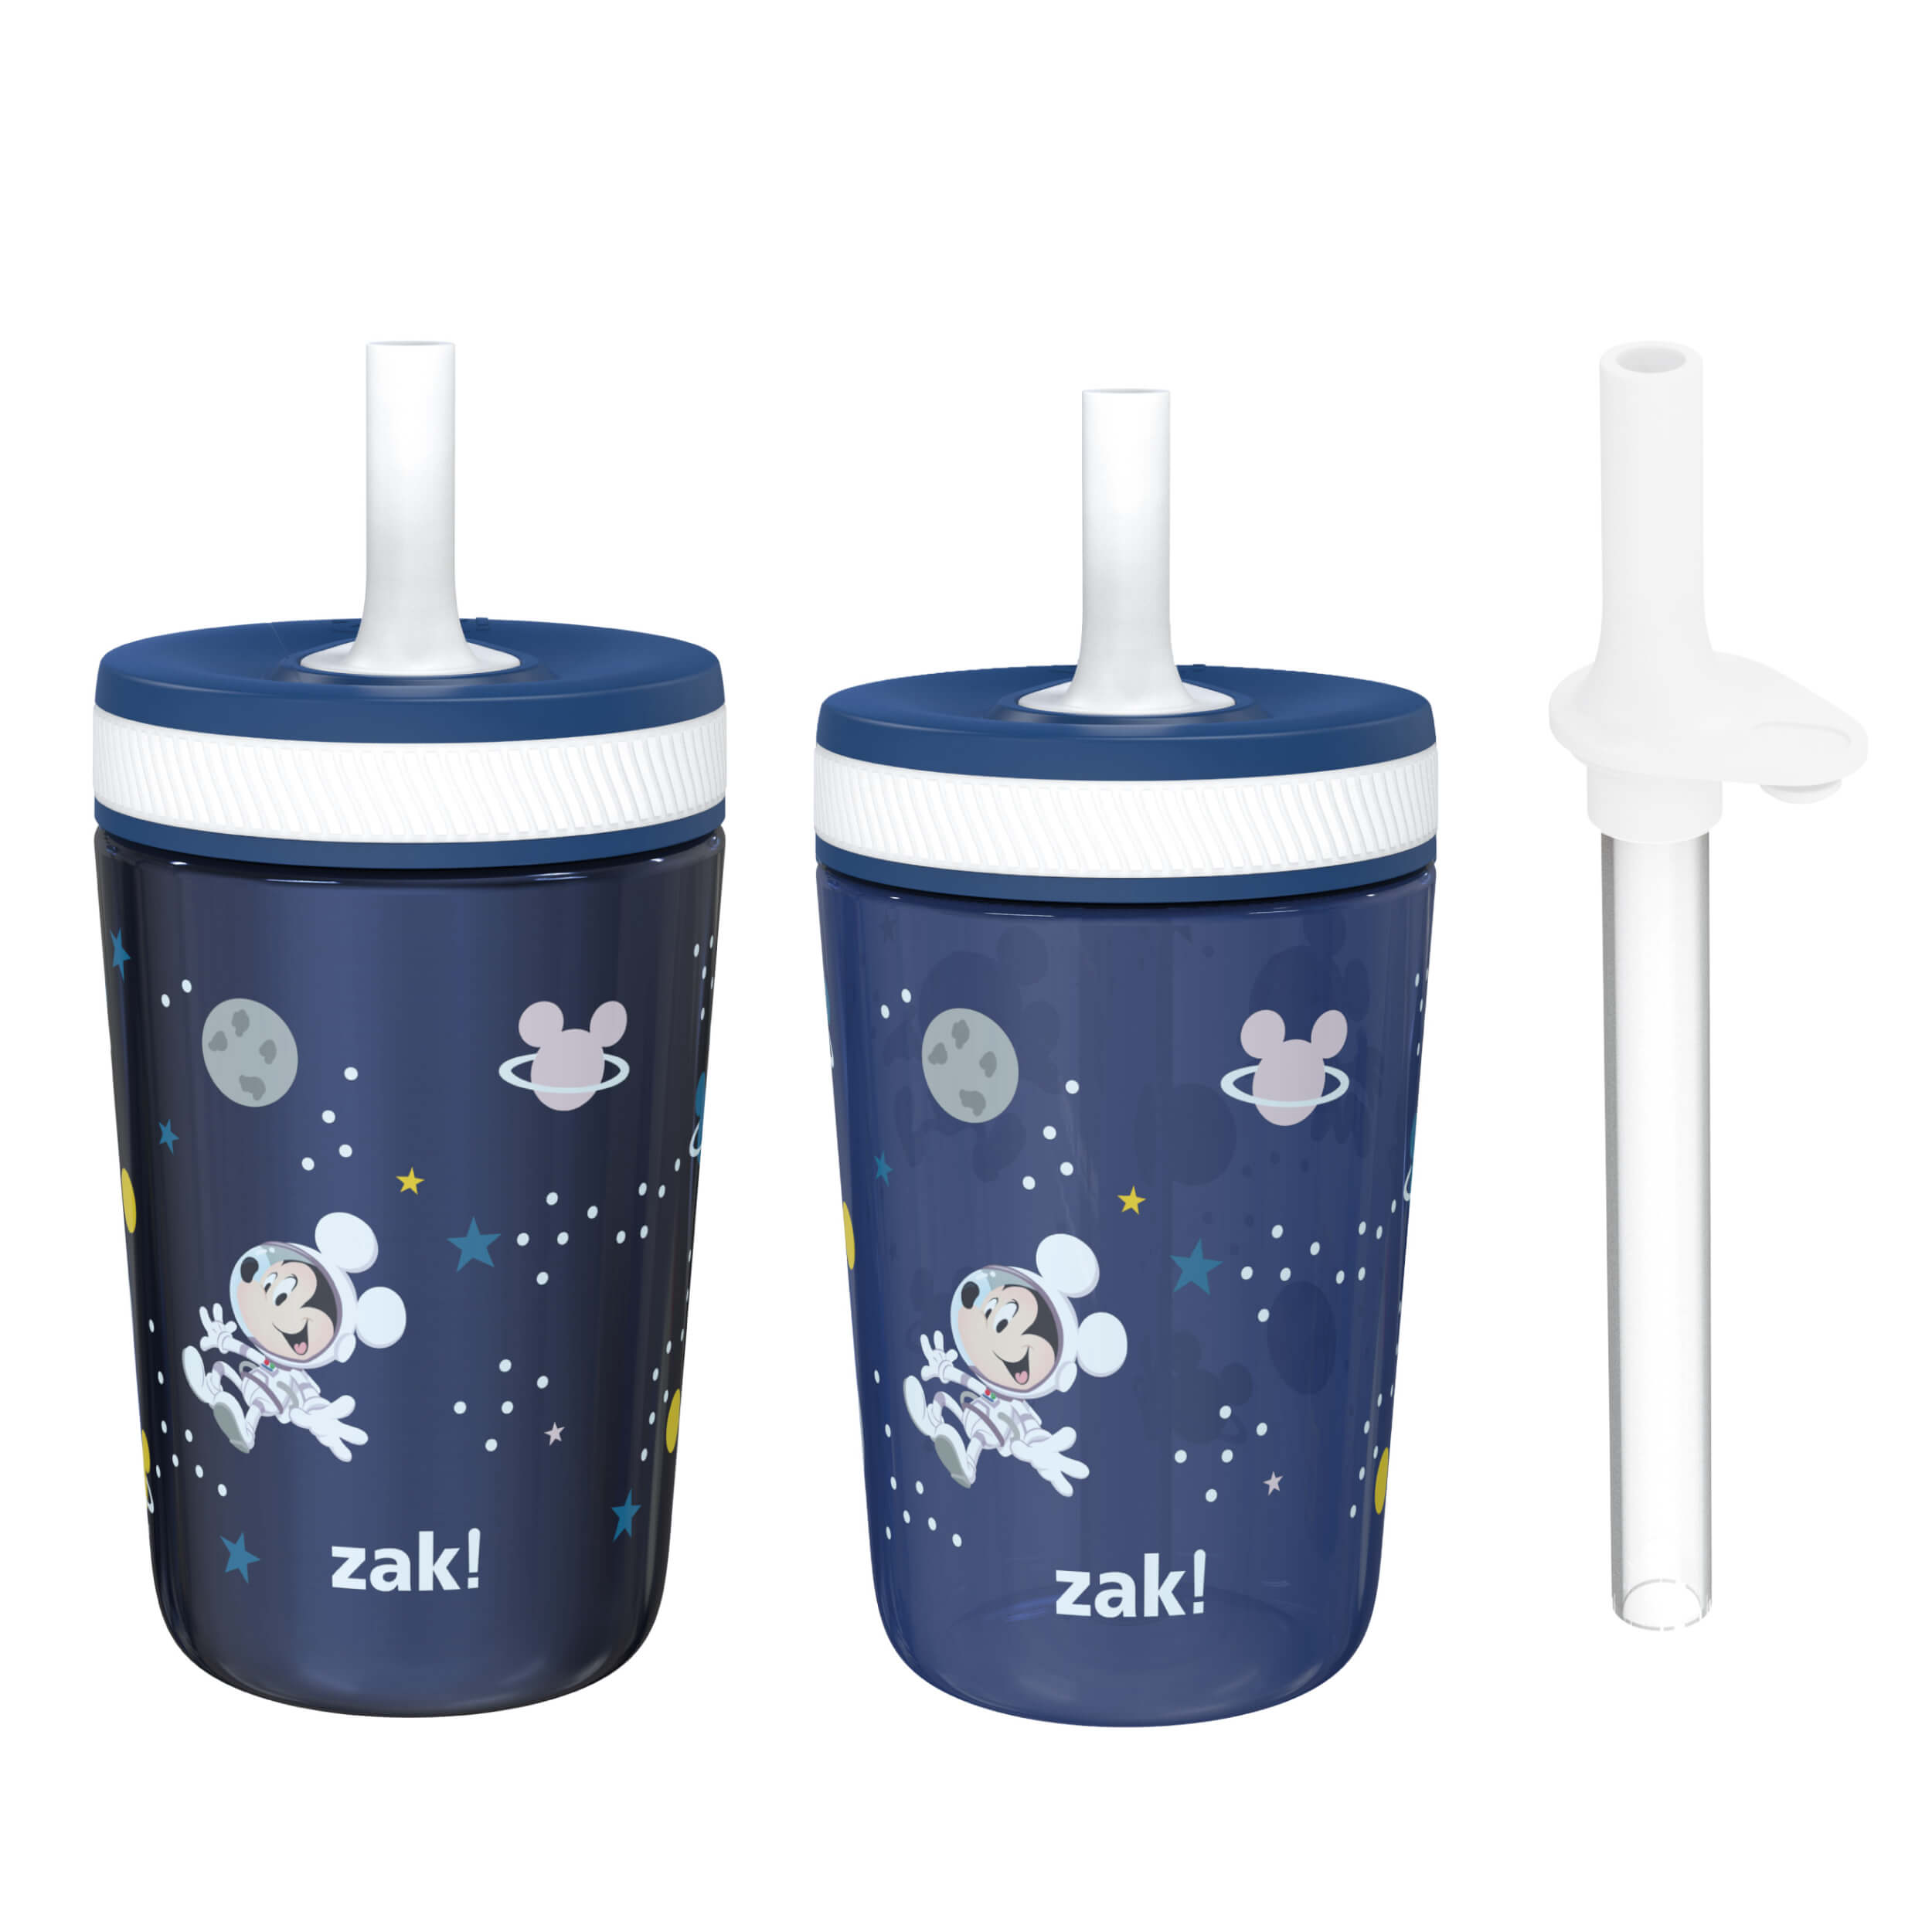 Zak Designs Bluey Reusable Plastic Bento Box with Leak-Proof Seal, Carrying Handle, Microwave Steam Vent, and Individual Containers for Kids' Packed